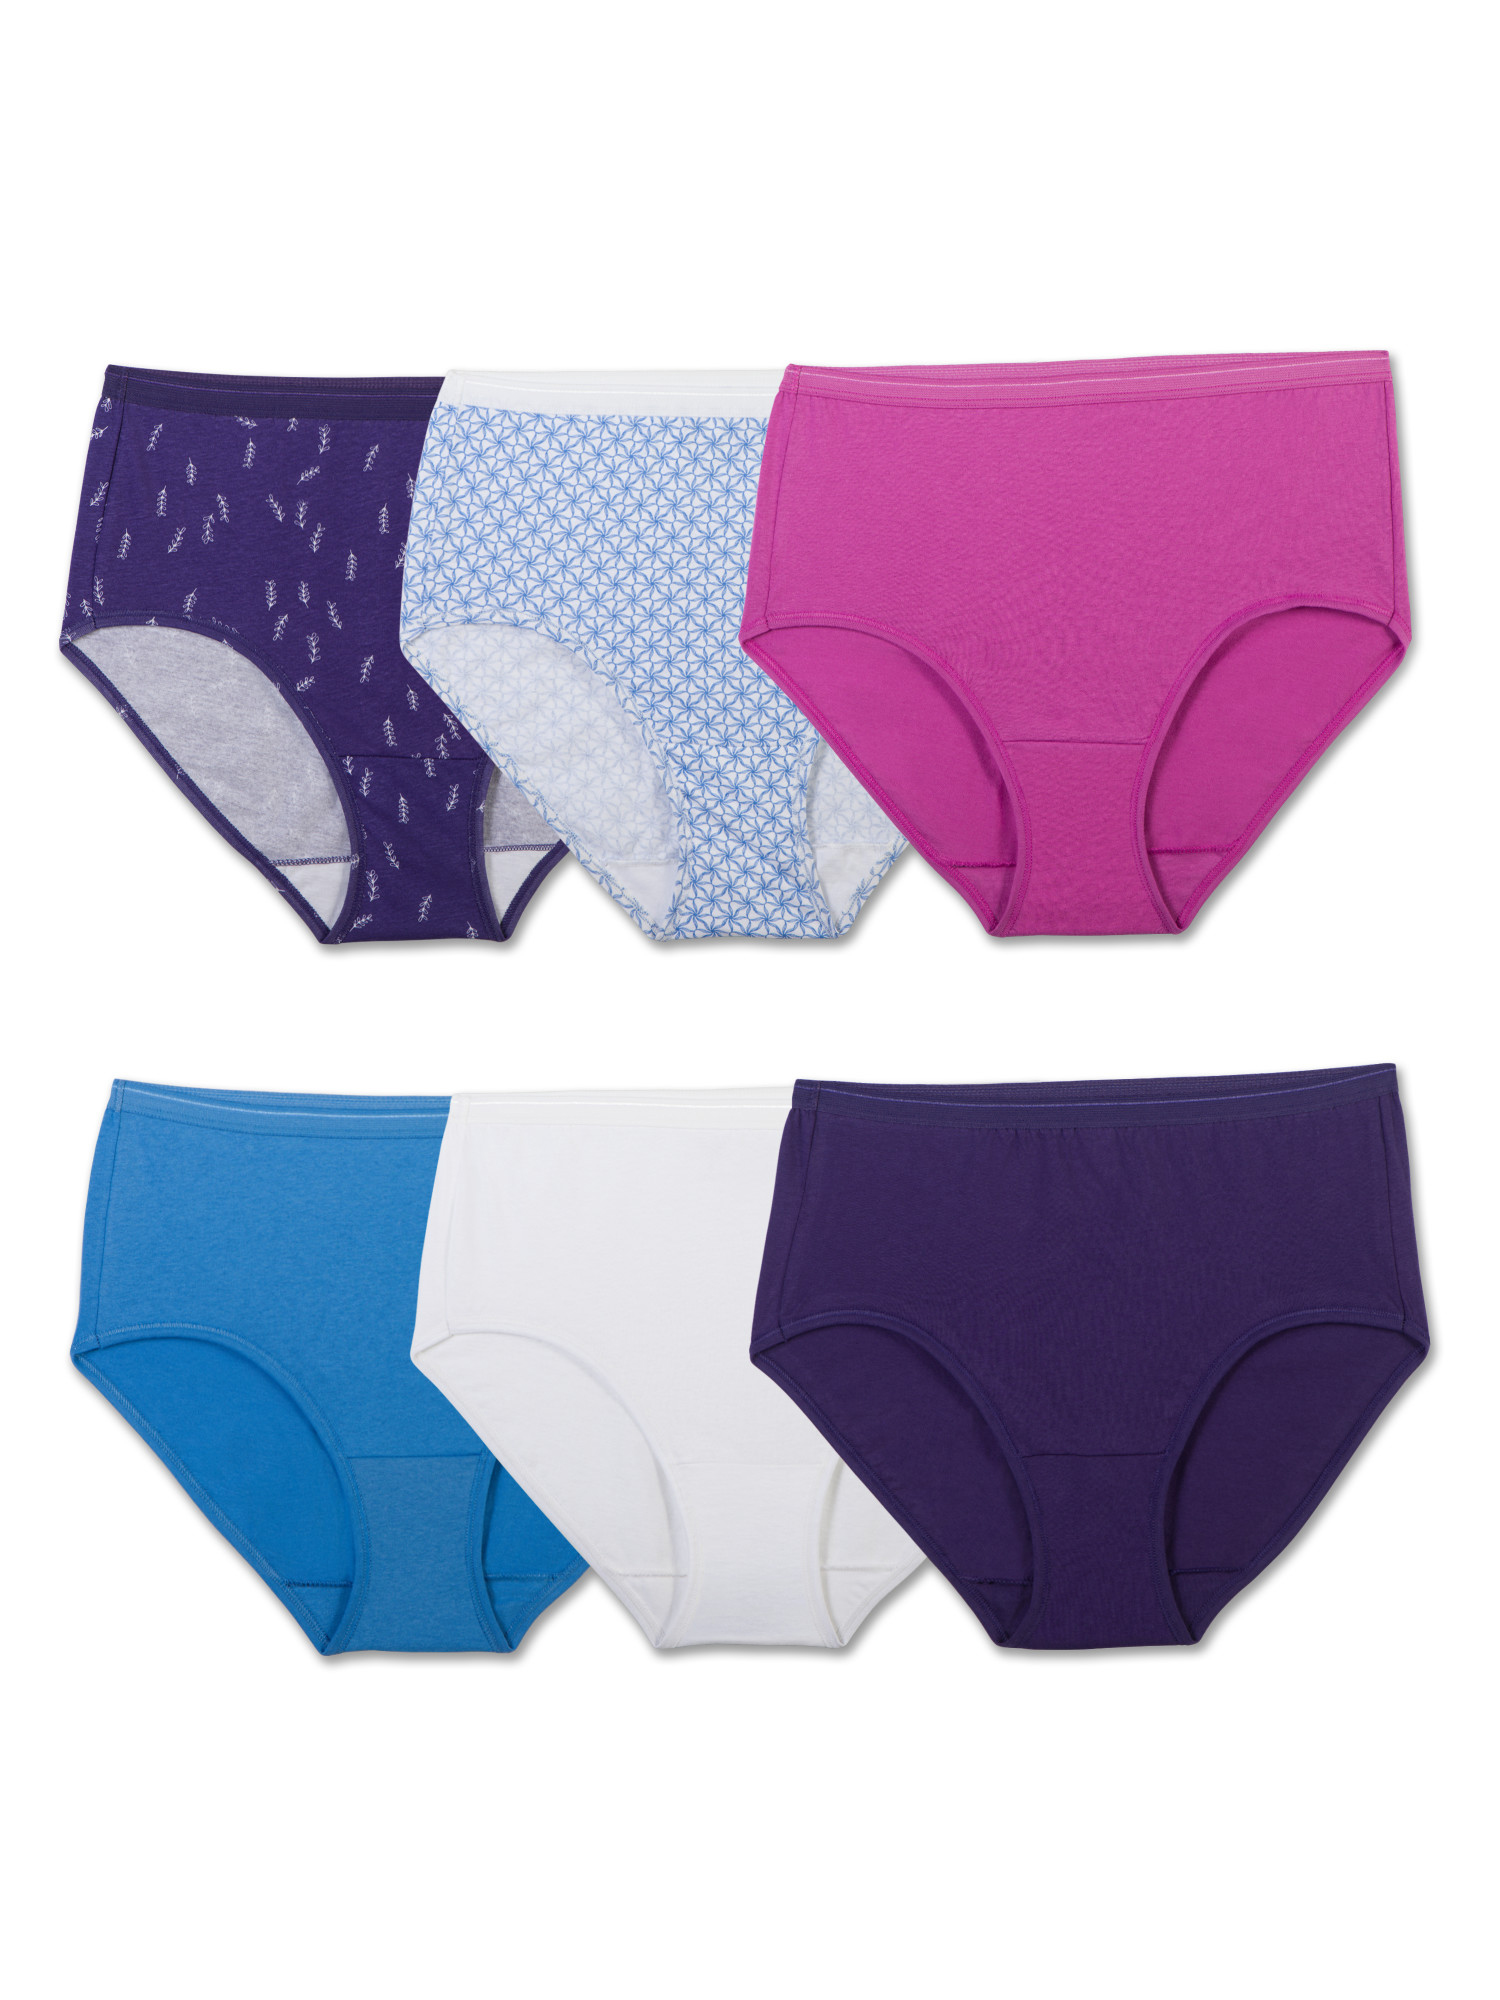 Fruit of the Loom Women's Assorted Cotton Brief, 6 Pack - Walmart.com